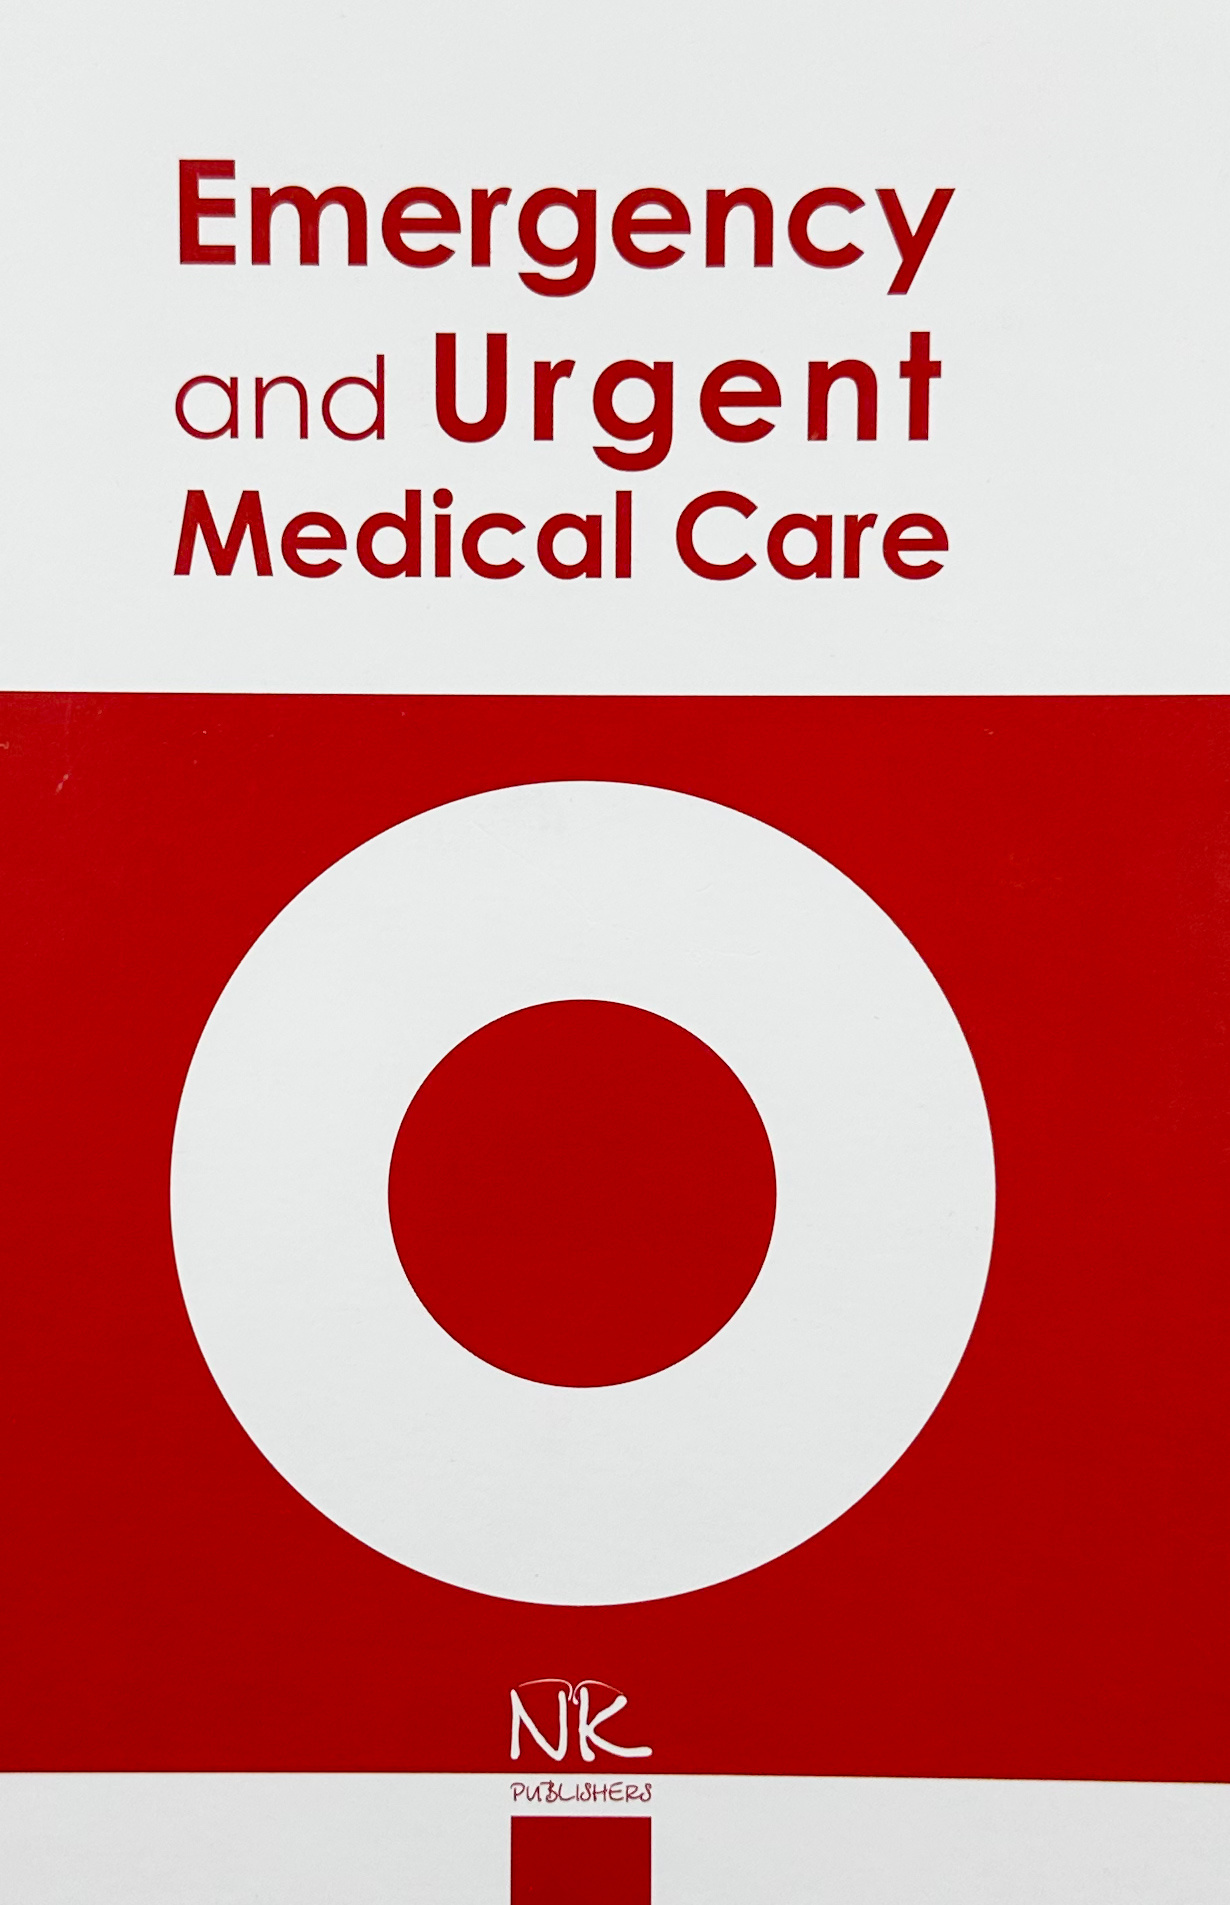 Emergency and Urgent Medical Care Student Training Manual